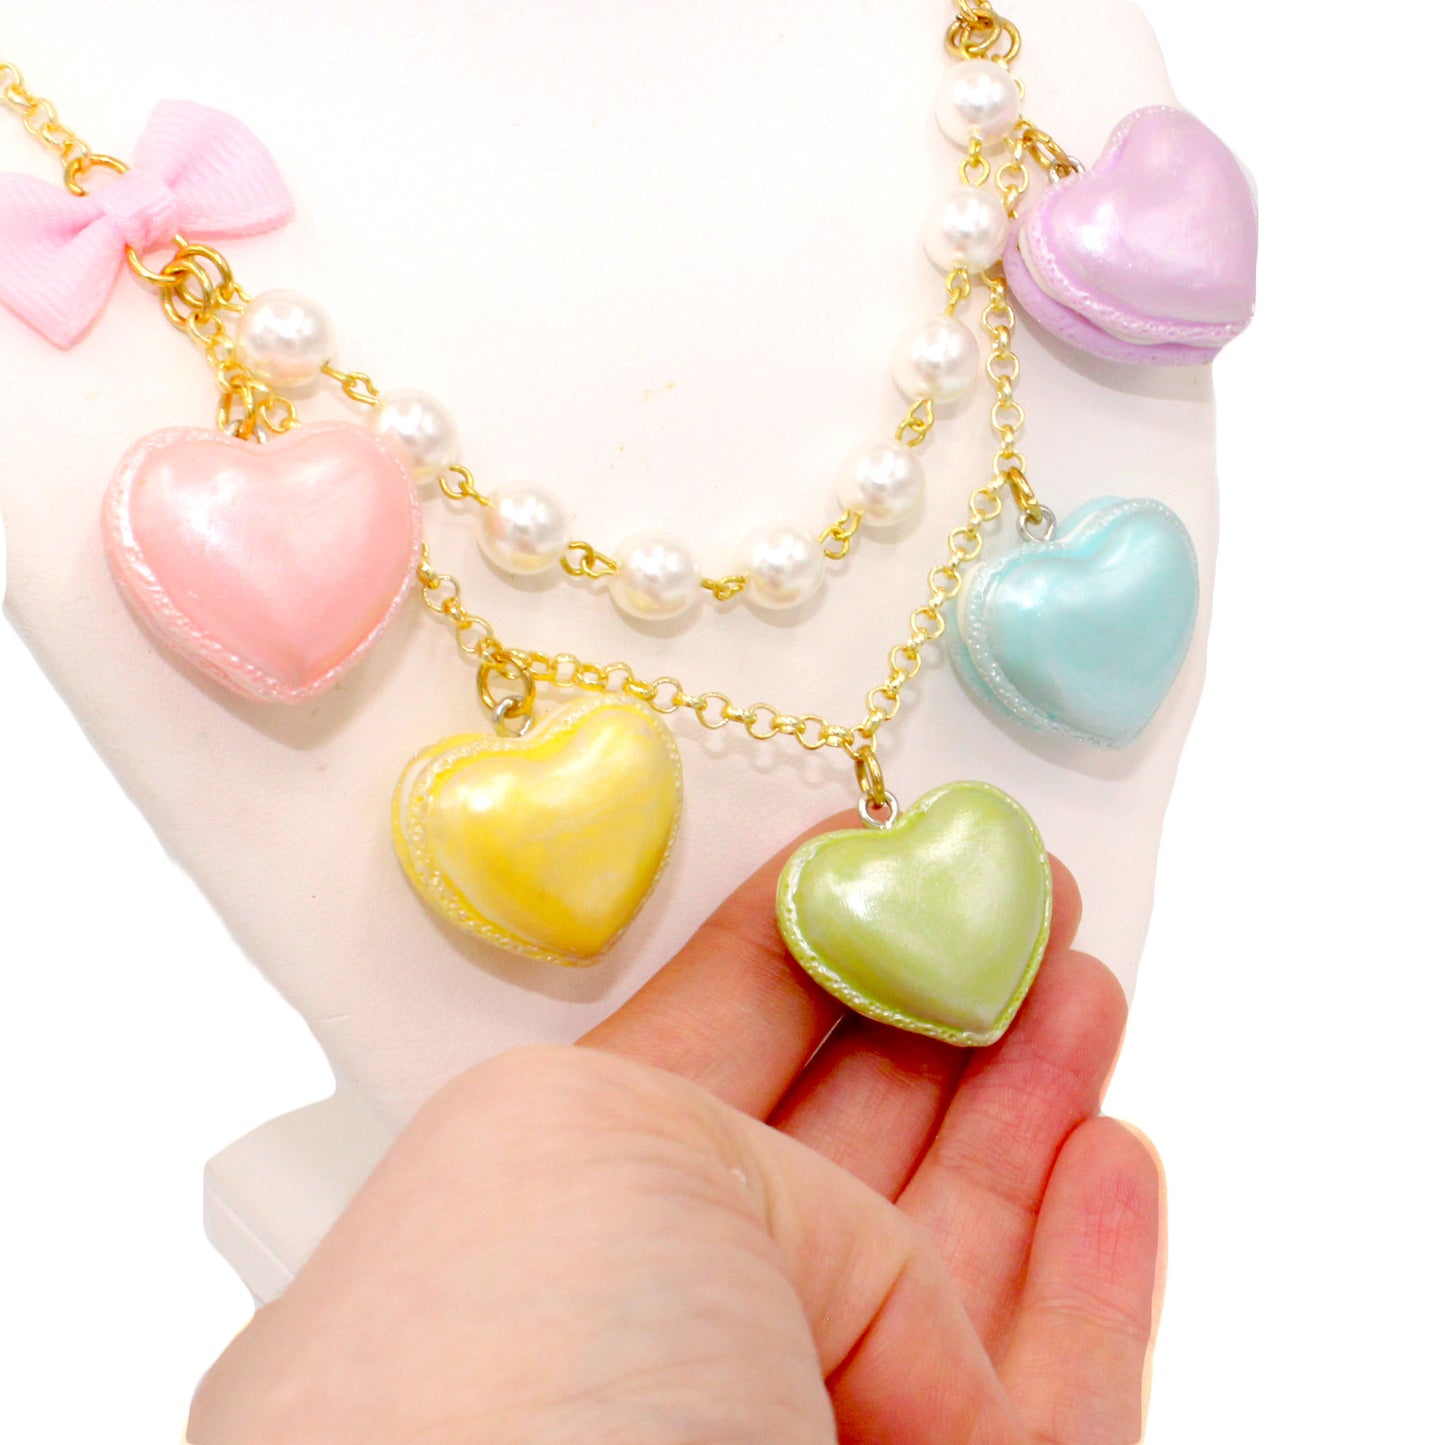 Pastel Heart Macaron Statement Necklace Kawaii LoveCore Valentines Day Charm Jewelry Gold or Silver